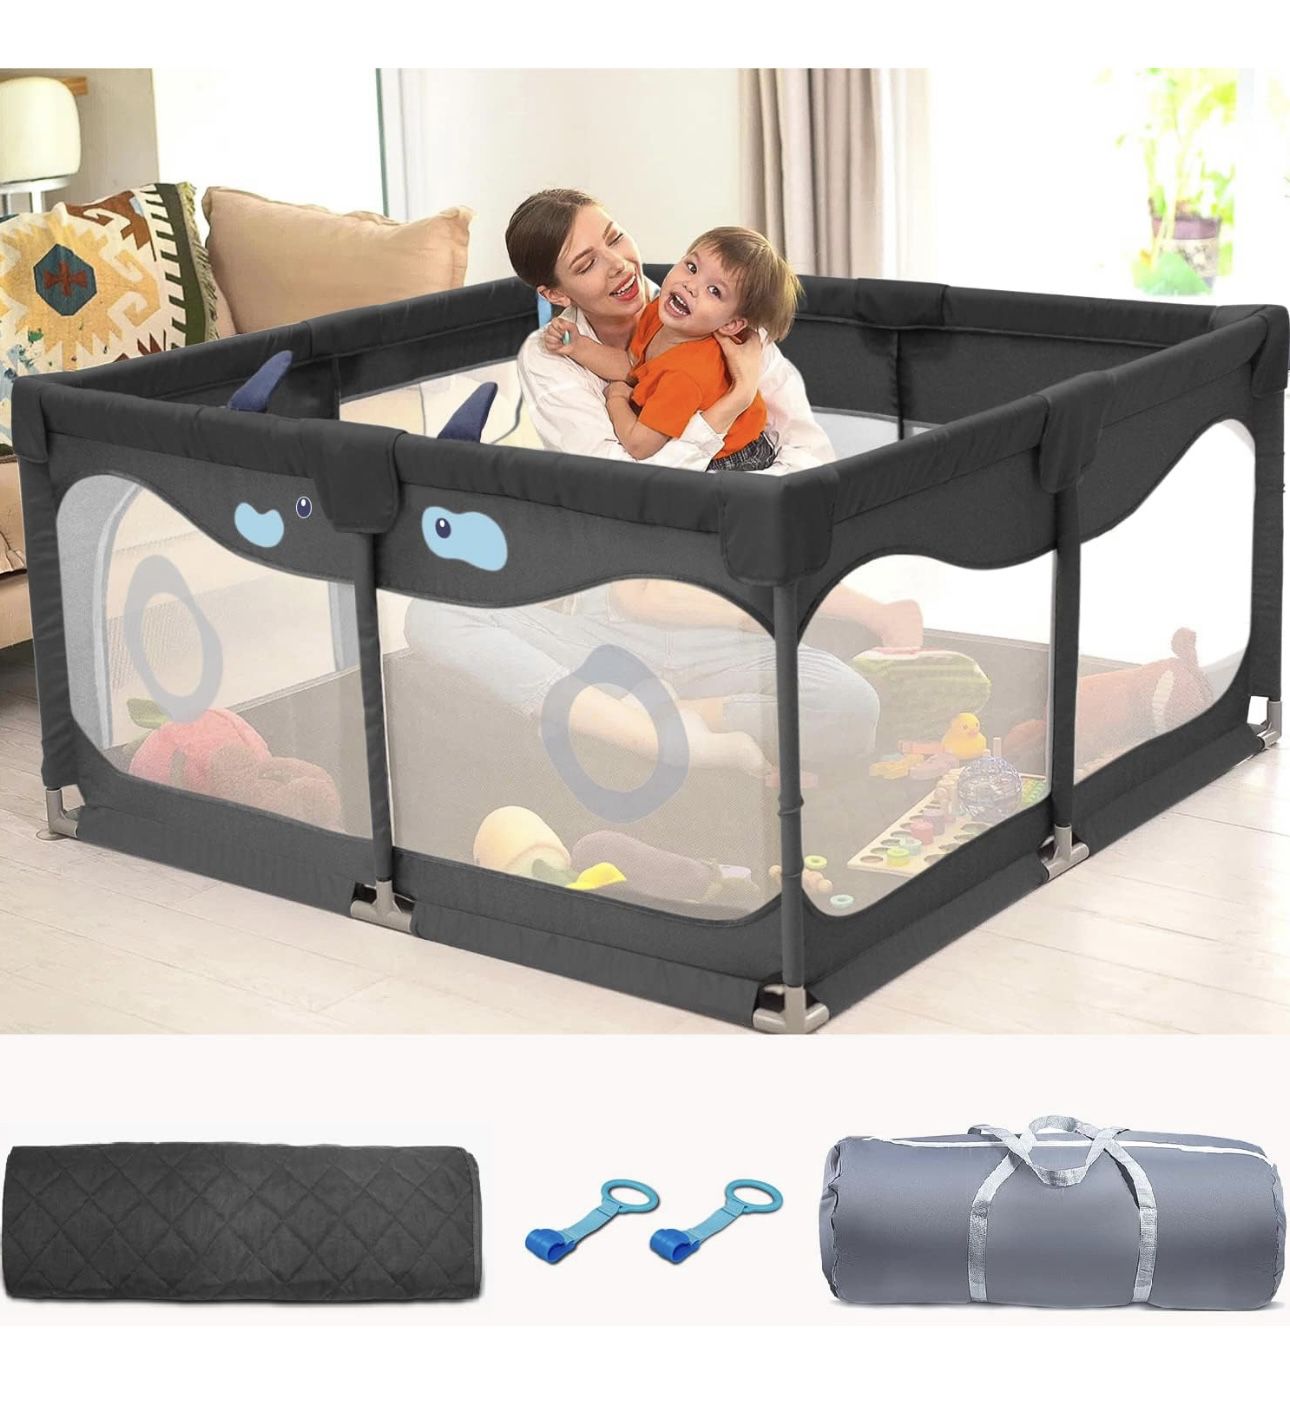 Playpen with Mat for Babies  Toddlers, Baby Play Yards No Gaps, 50x50 Playpen with Gate, Indoor Outdoor Kids Activity Center, Safety Baby Fence 